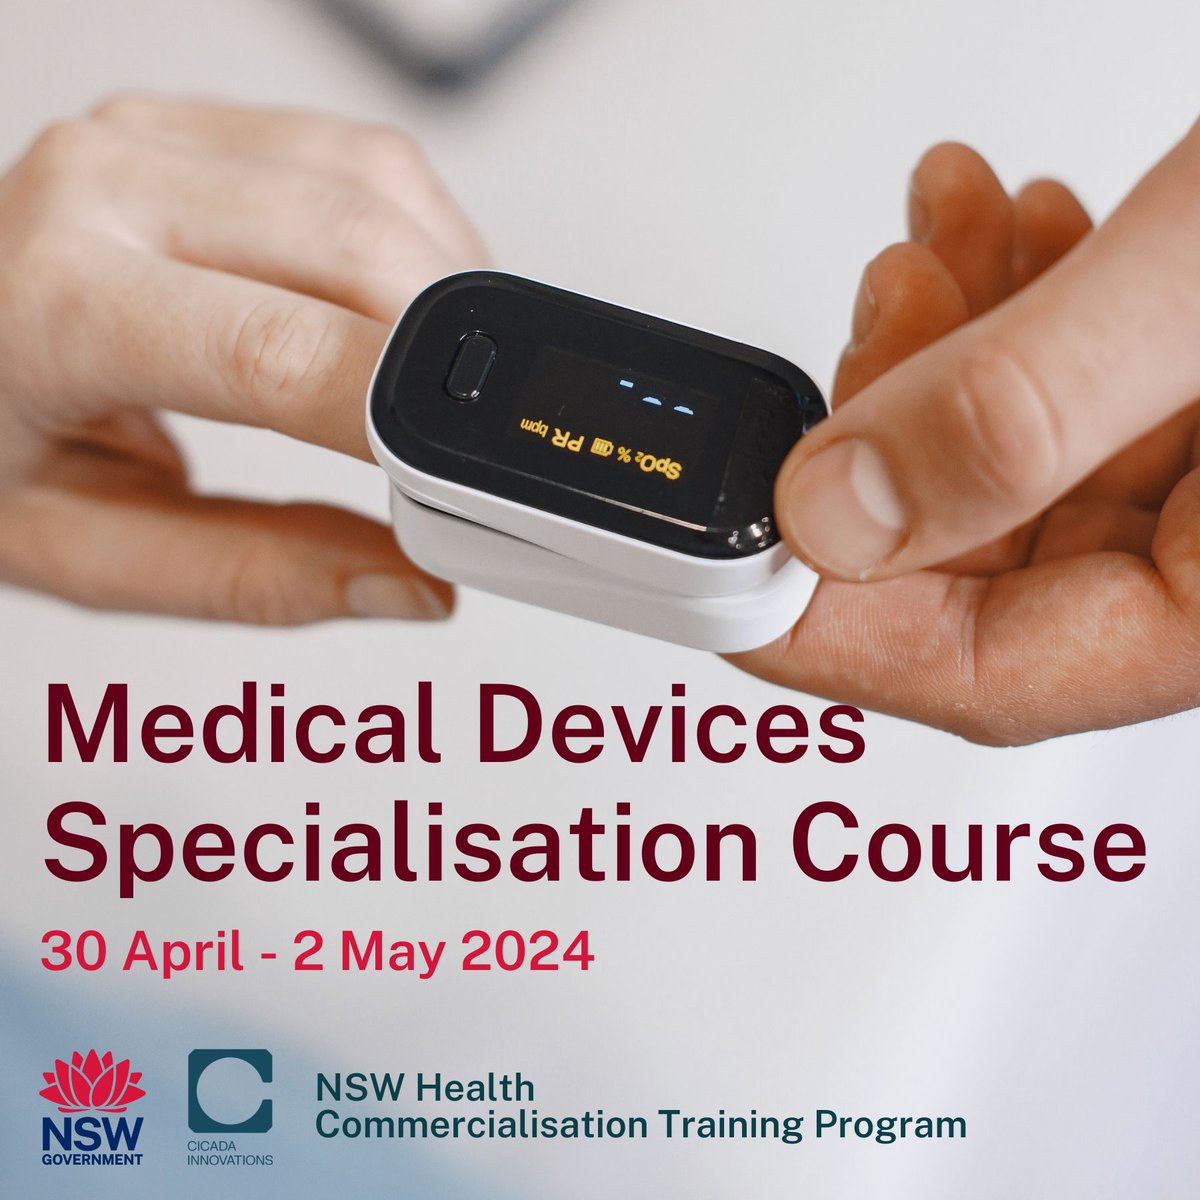 Join our FREE Medical Devices specialisation course, part of the @NSWHealth Commercialisation Training Program before applications close TOMORROW⏳! Delivered in partnership with @Mark_C_Flynn . rb.gy/pl0o0h